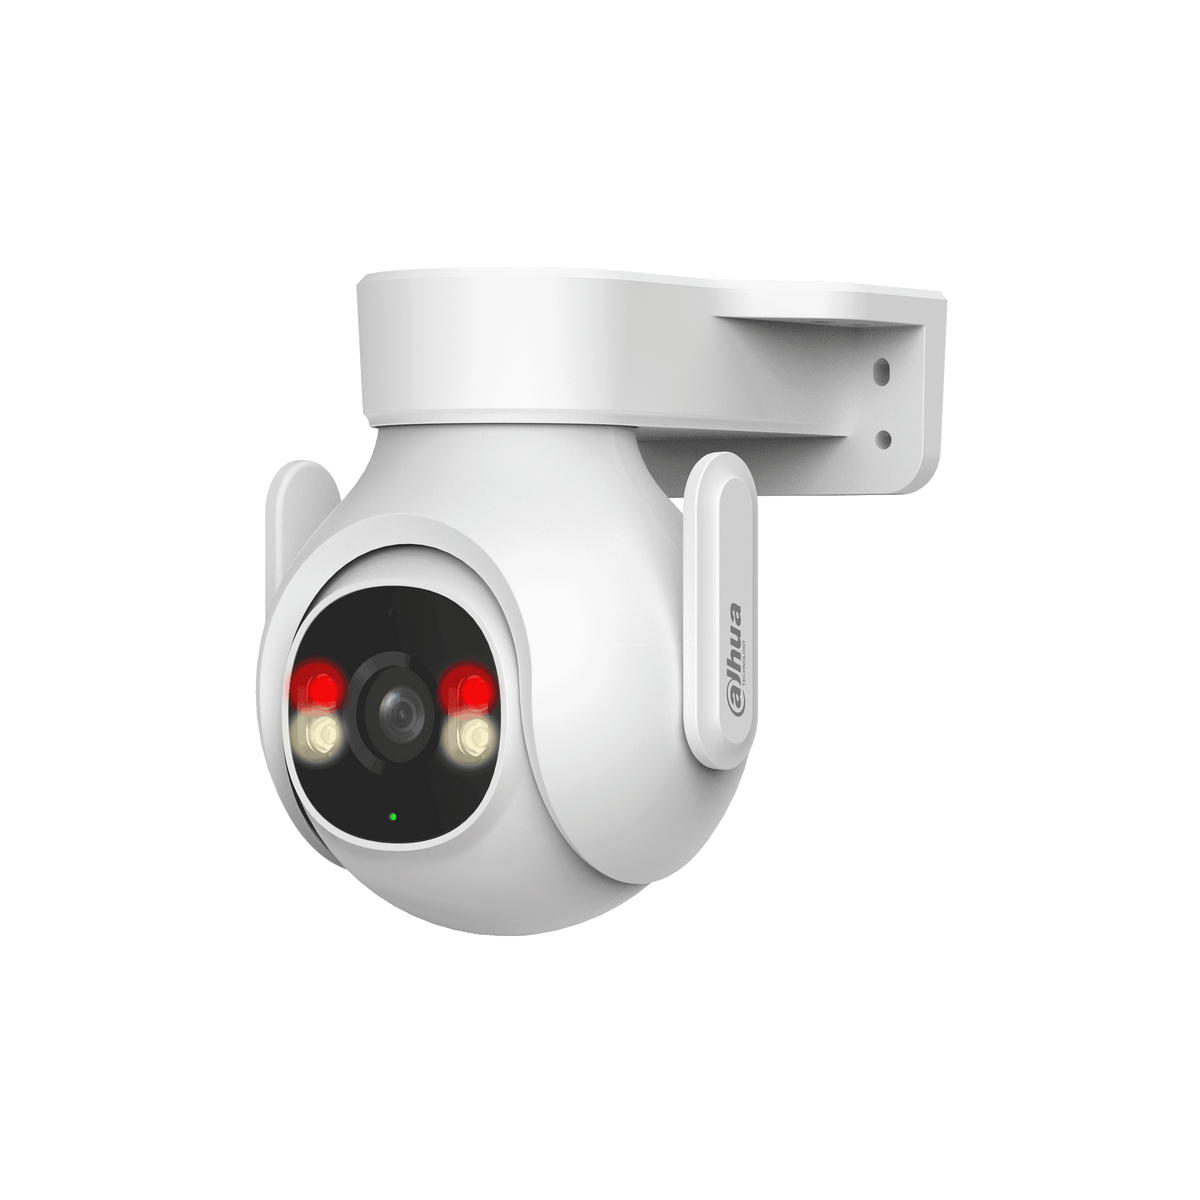 DAHUA P3B-PV 3MP Outdoor Full-color Active Deterrence Fixed-focal Wi-Fi Pan & Tilt Network Camera